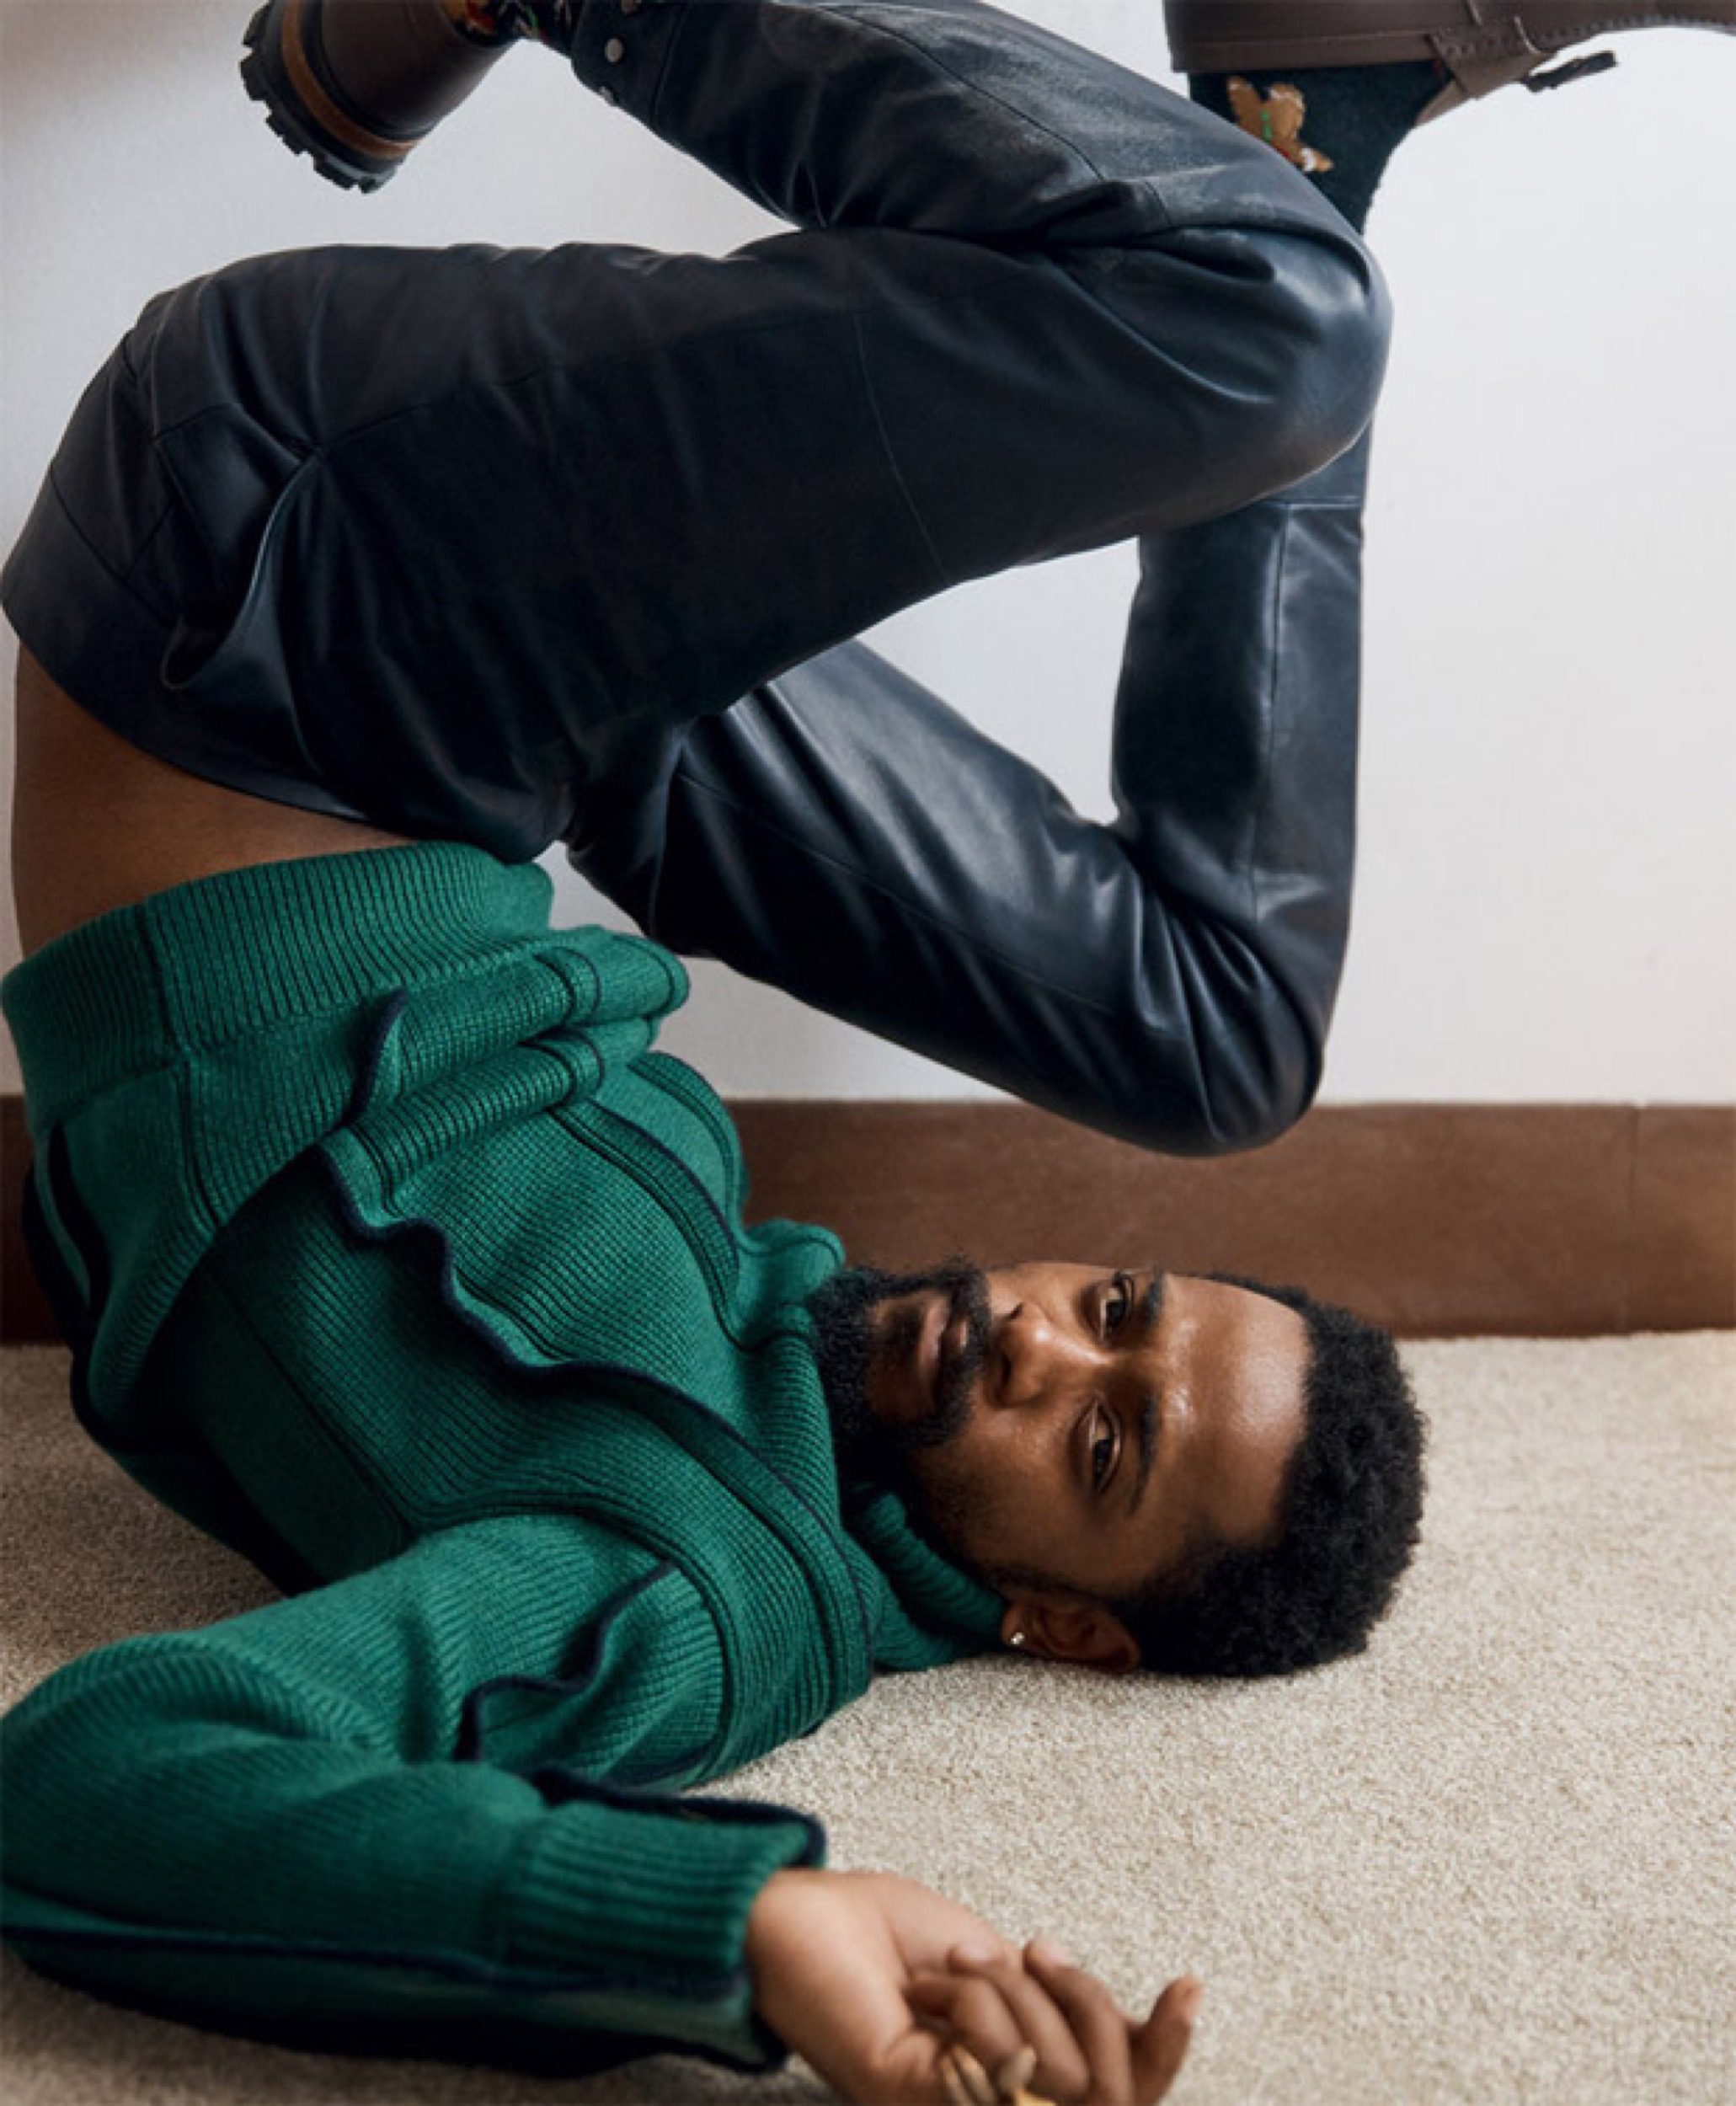 kathrin-hohberg-essential-homme-lakeith-stanfield-david-roemer-12